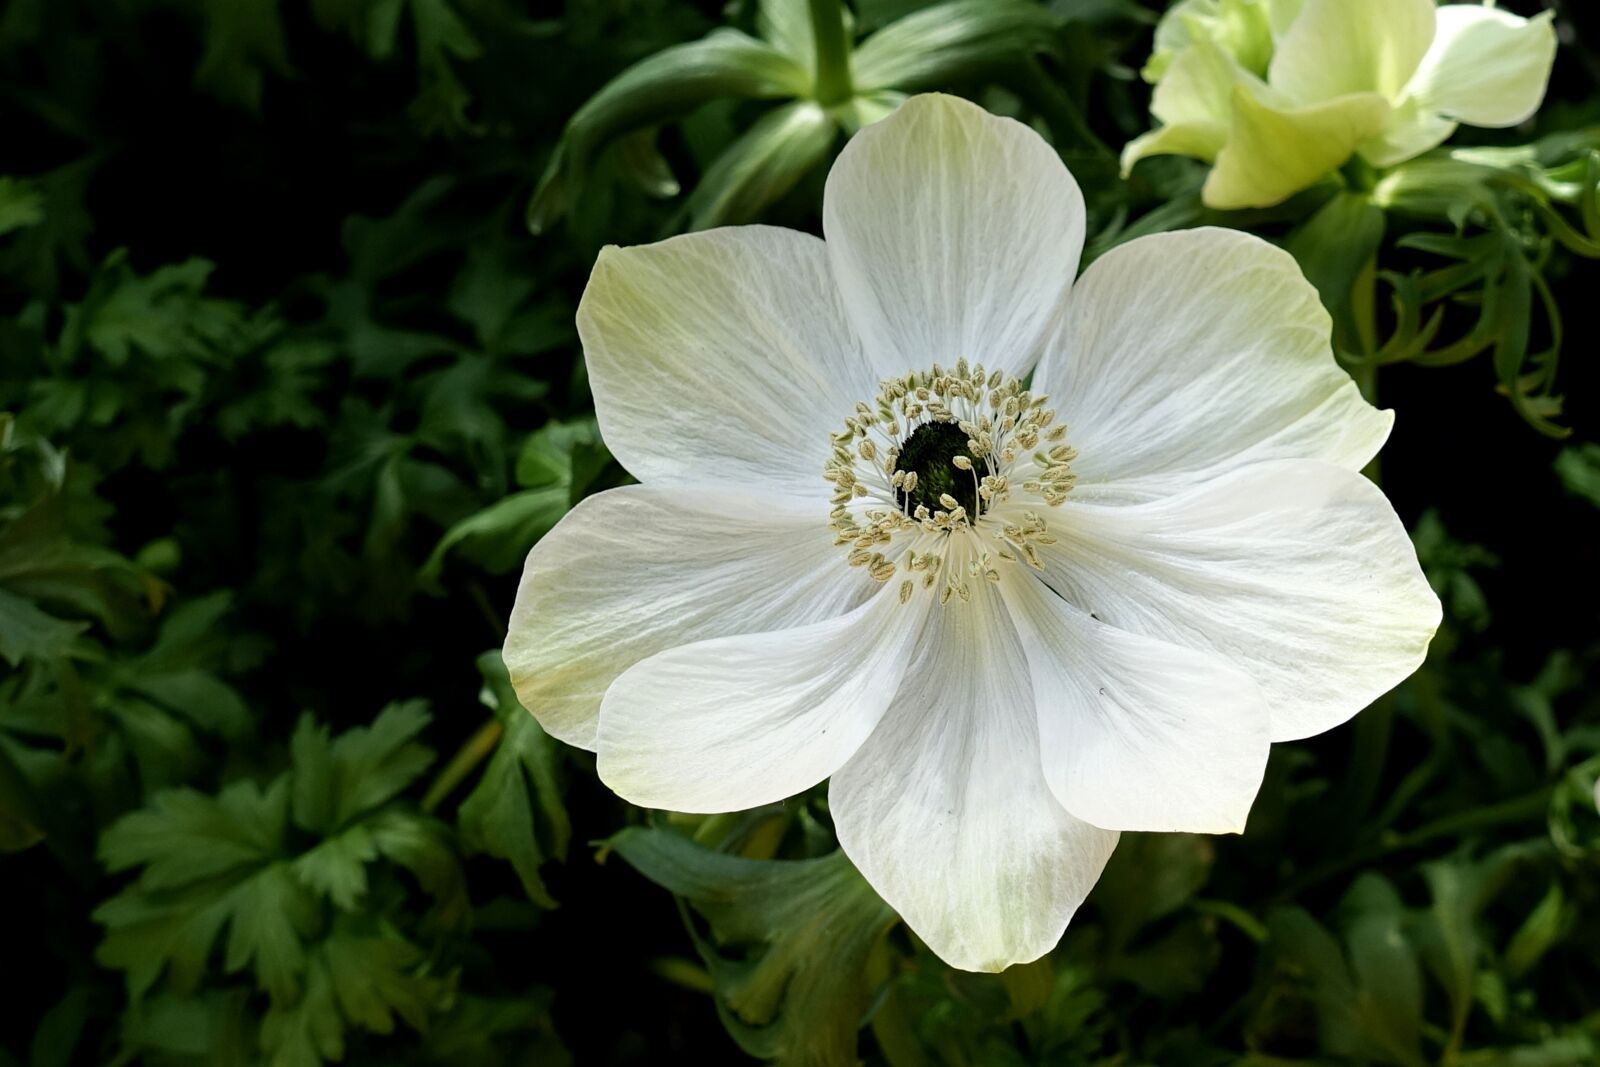 Sony Cyber-shot DSC-RX100 IV sample photo. Anemone, flower, nature photography